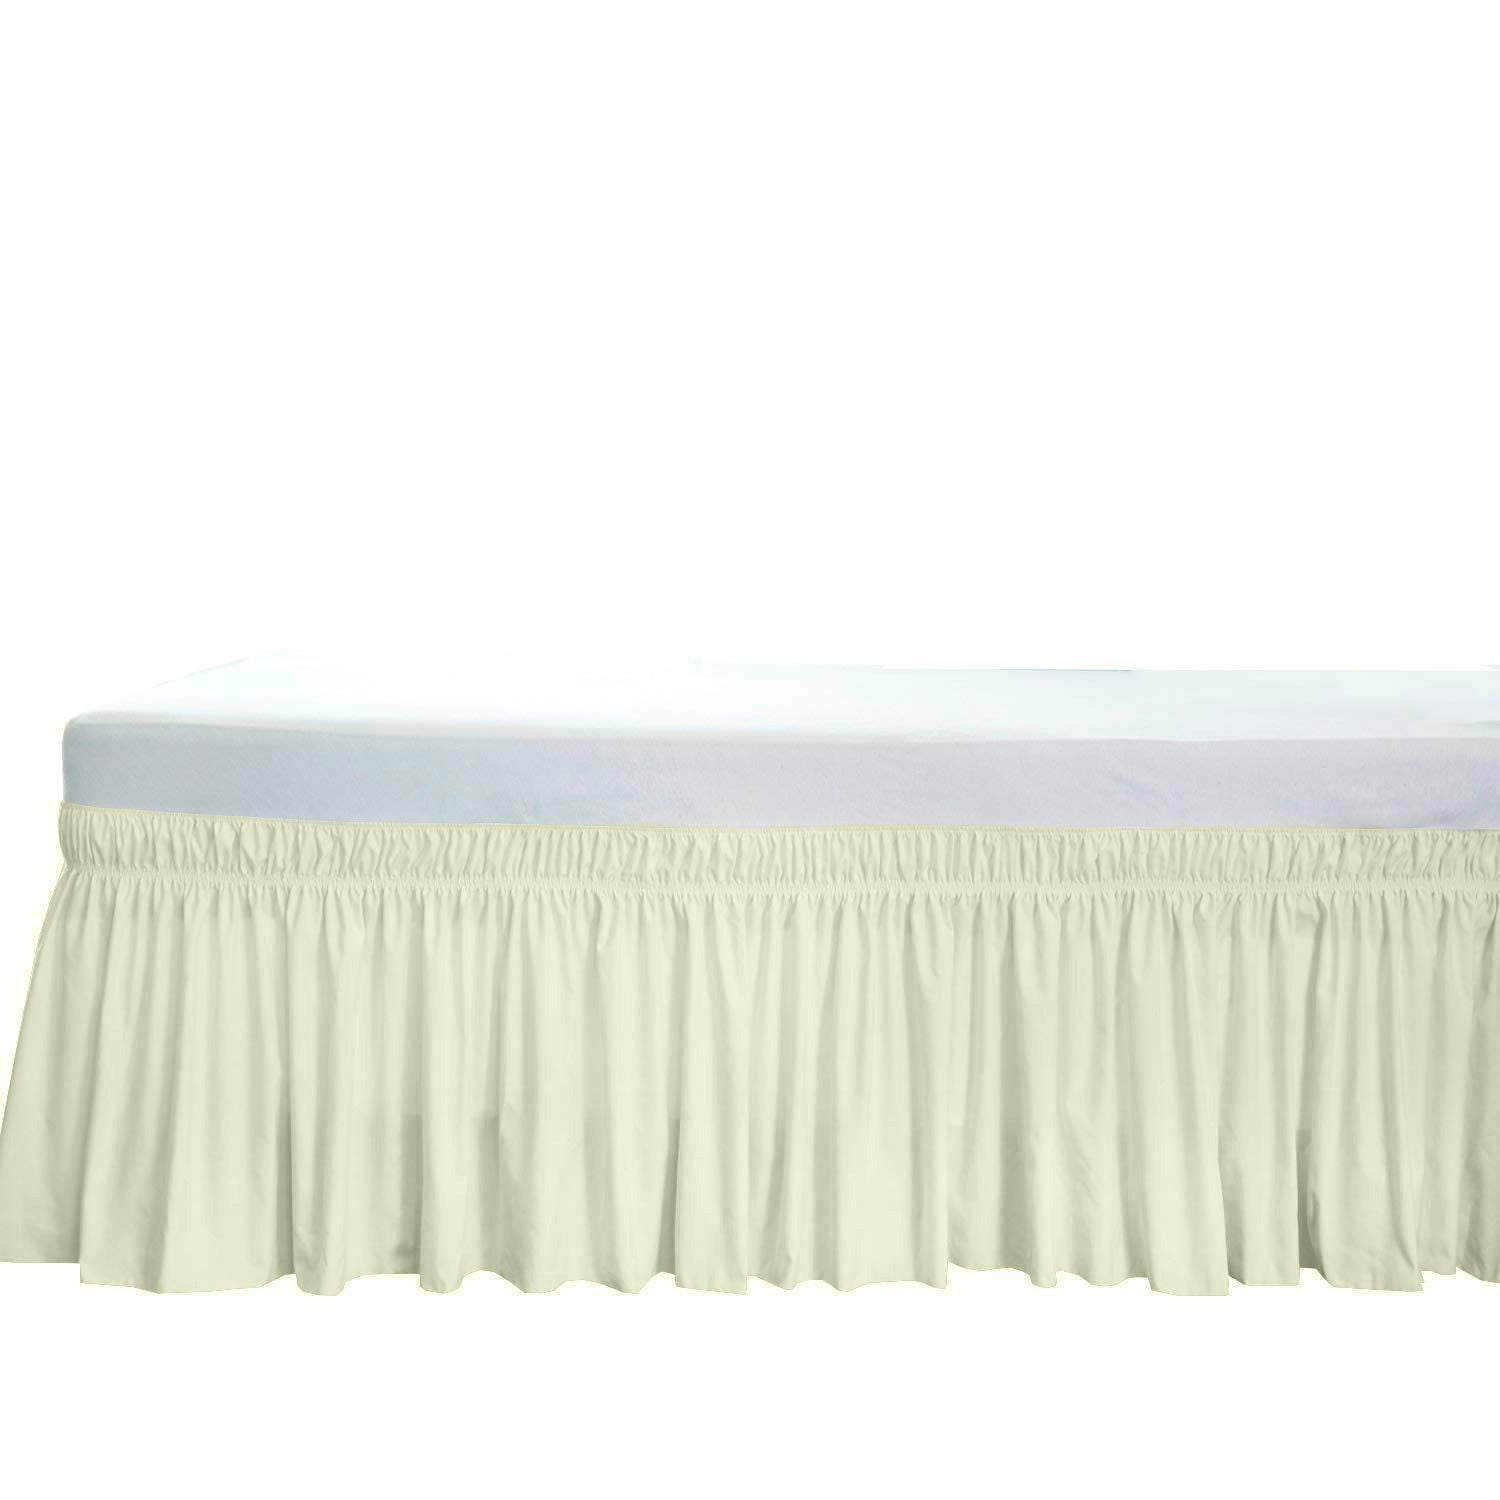 Threads Collection Presents 600 Thread Count King Wrinkle & Fade Resistant Egyptian Quality Three Fabric Sides Easy On/Easy Off Wrap Around Elastic Bed Skirt with 15-inch Drop Grey 